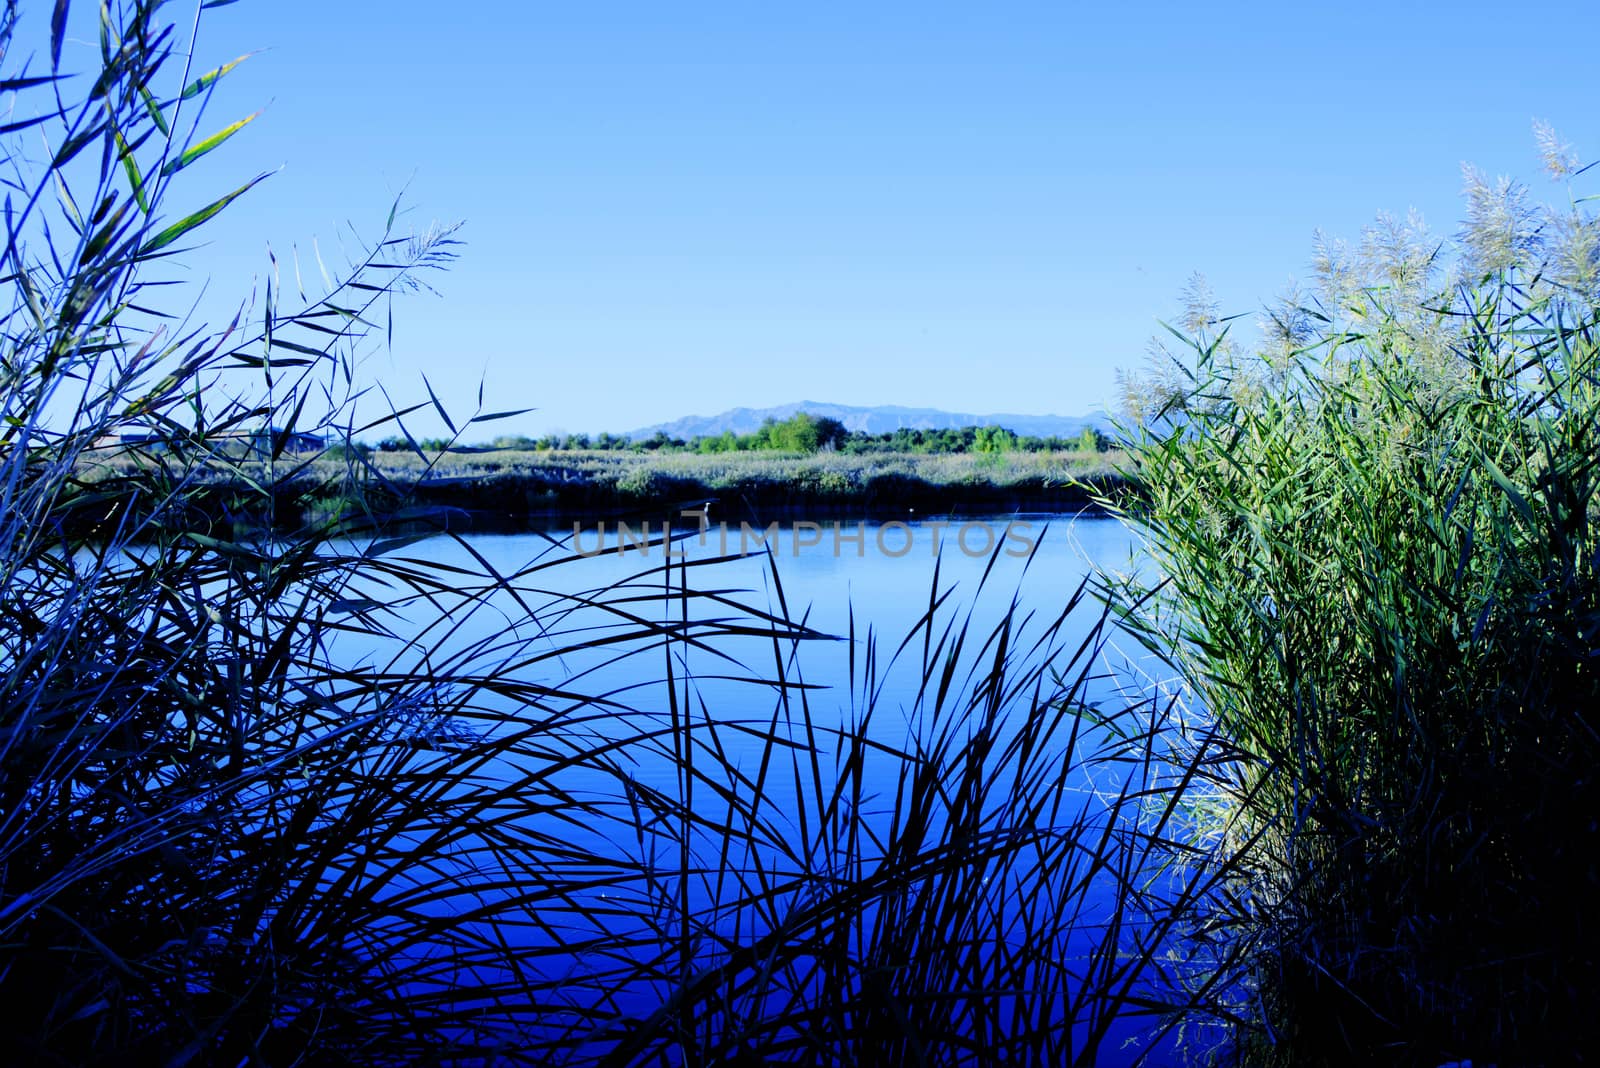 Grass and Water, Wetlands Park, Las Vegas, Nevada, USA by oskyle